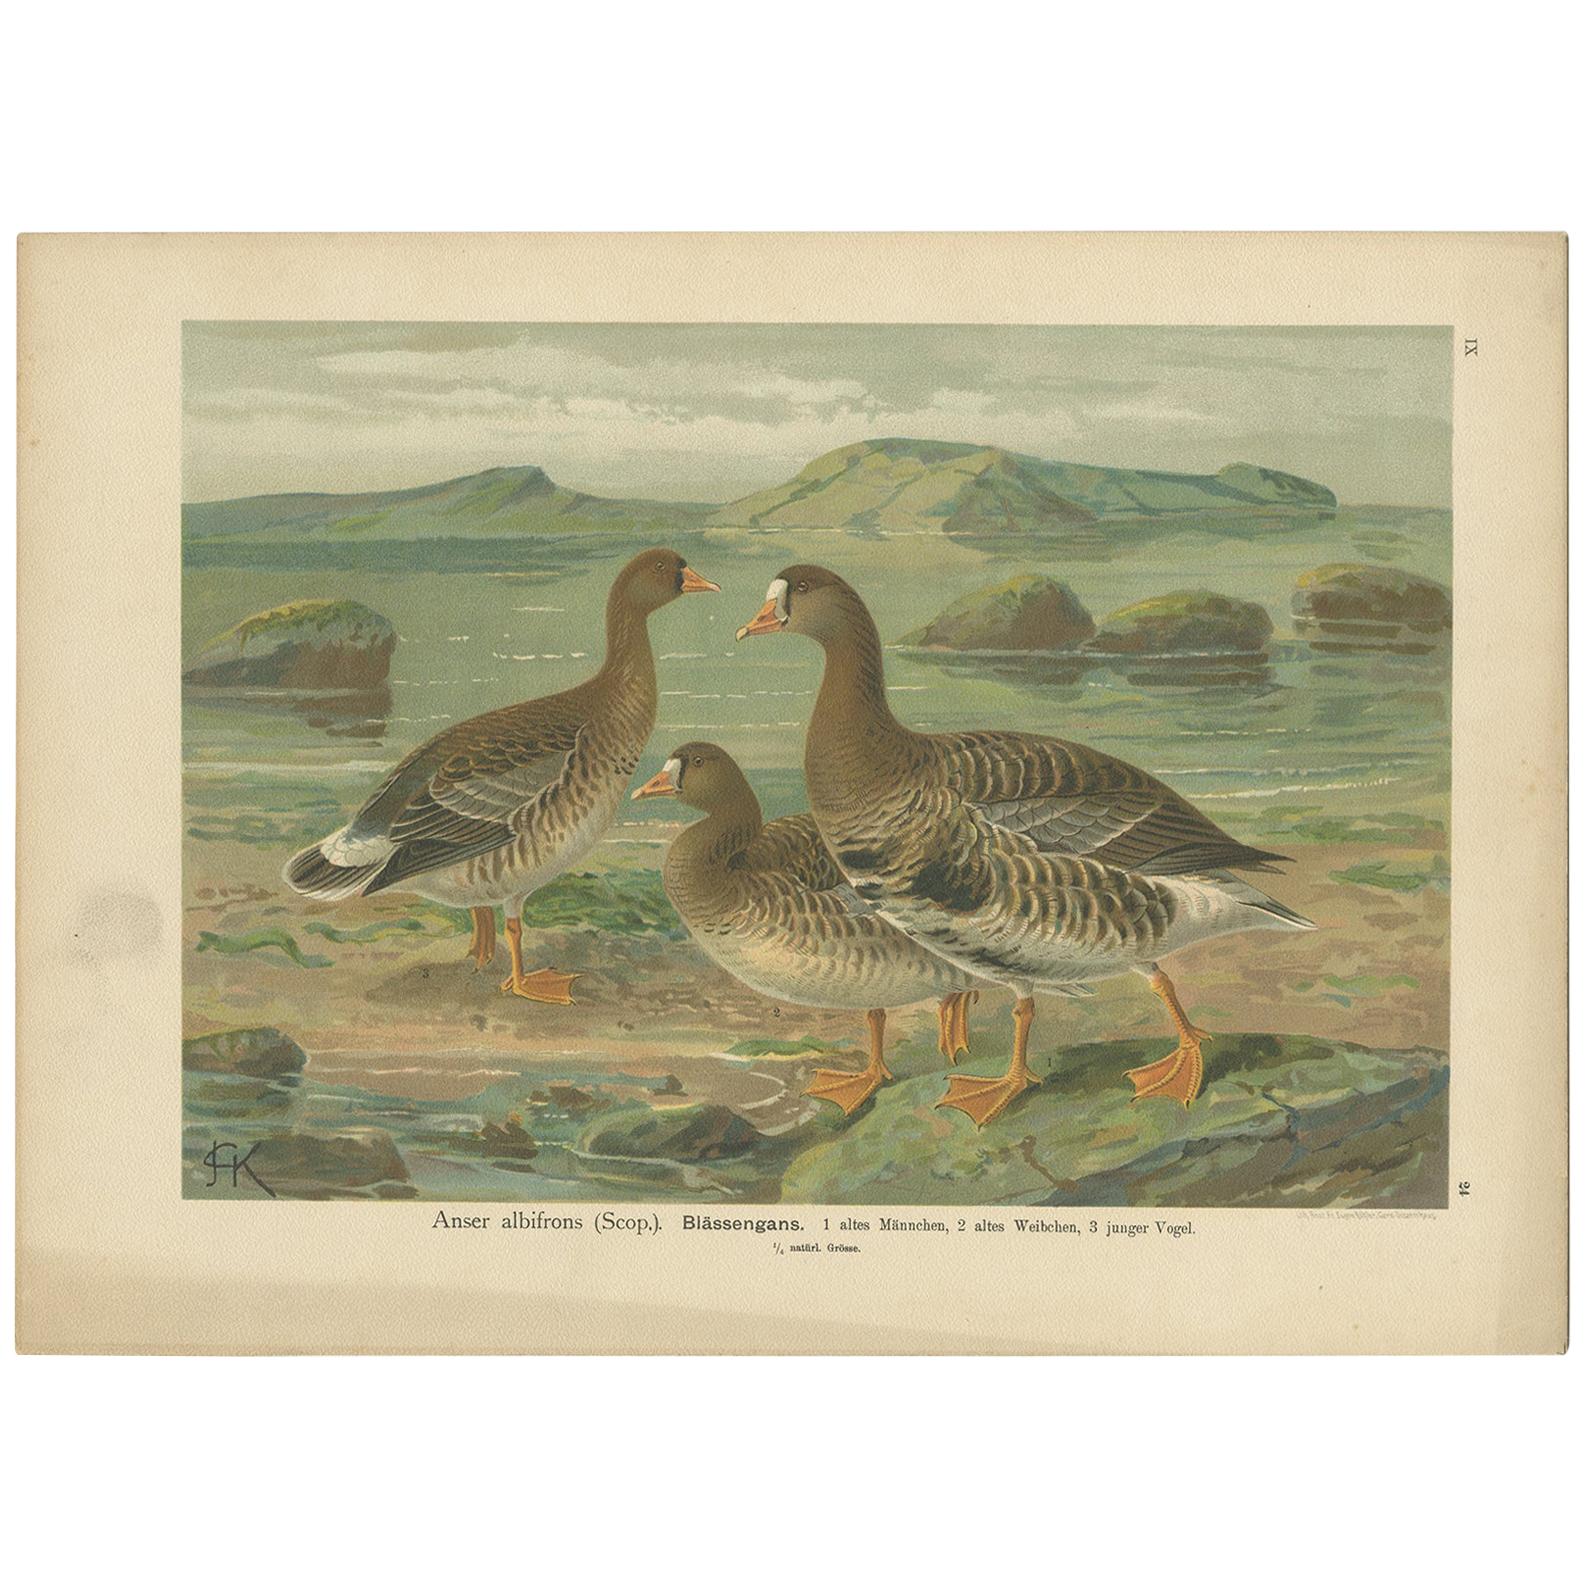 Antique Bird Print of the Greater White-Fronted Goose by Naumann, circa 1895